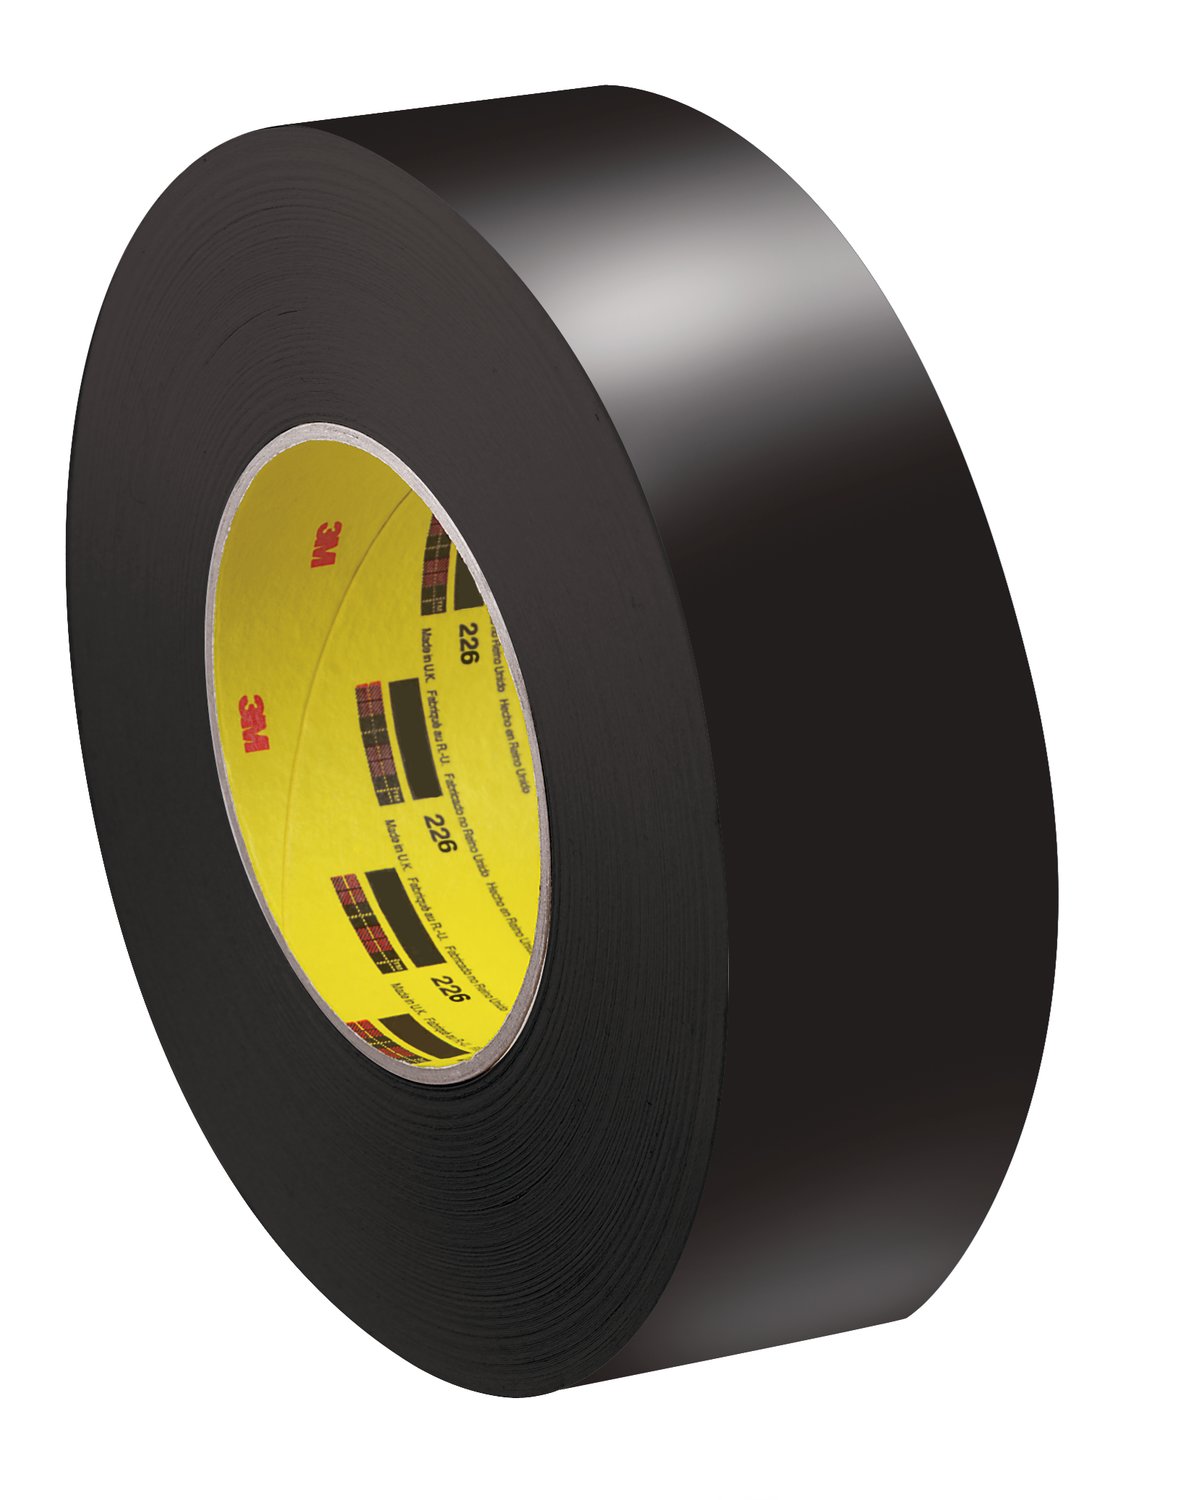 7010373496 - Scotch Solvent Resistant Masking Tape 226, Black, 1/2 in x 60 yd, 10.6
mil, 72 Roll/Case